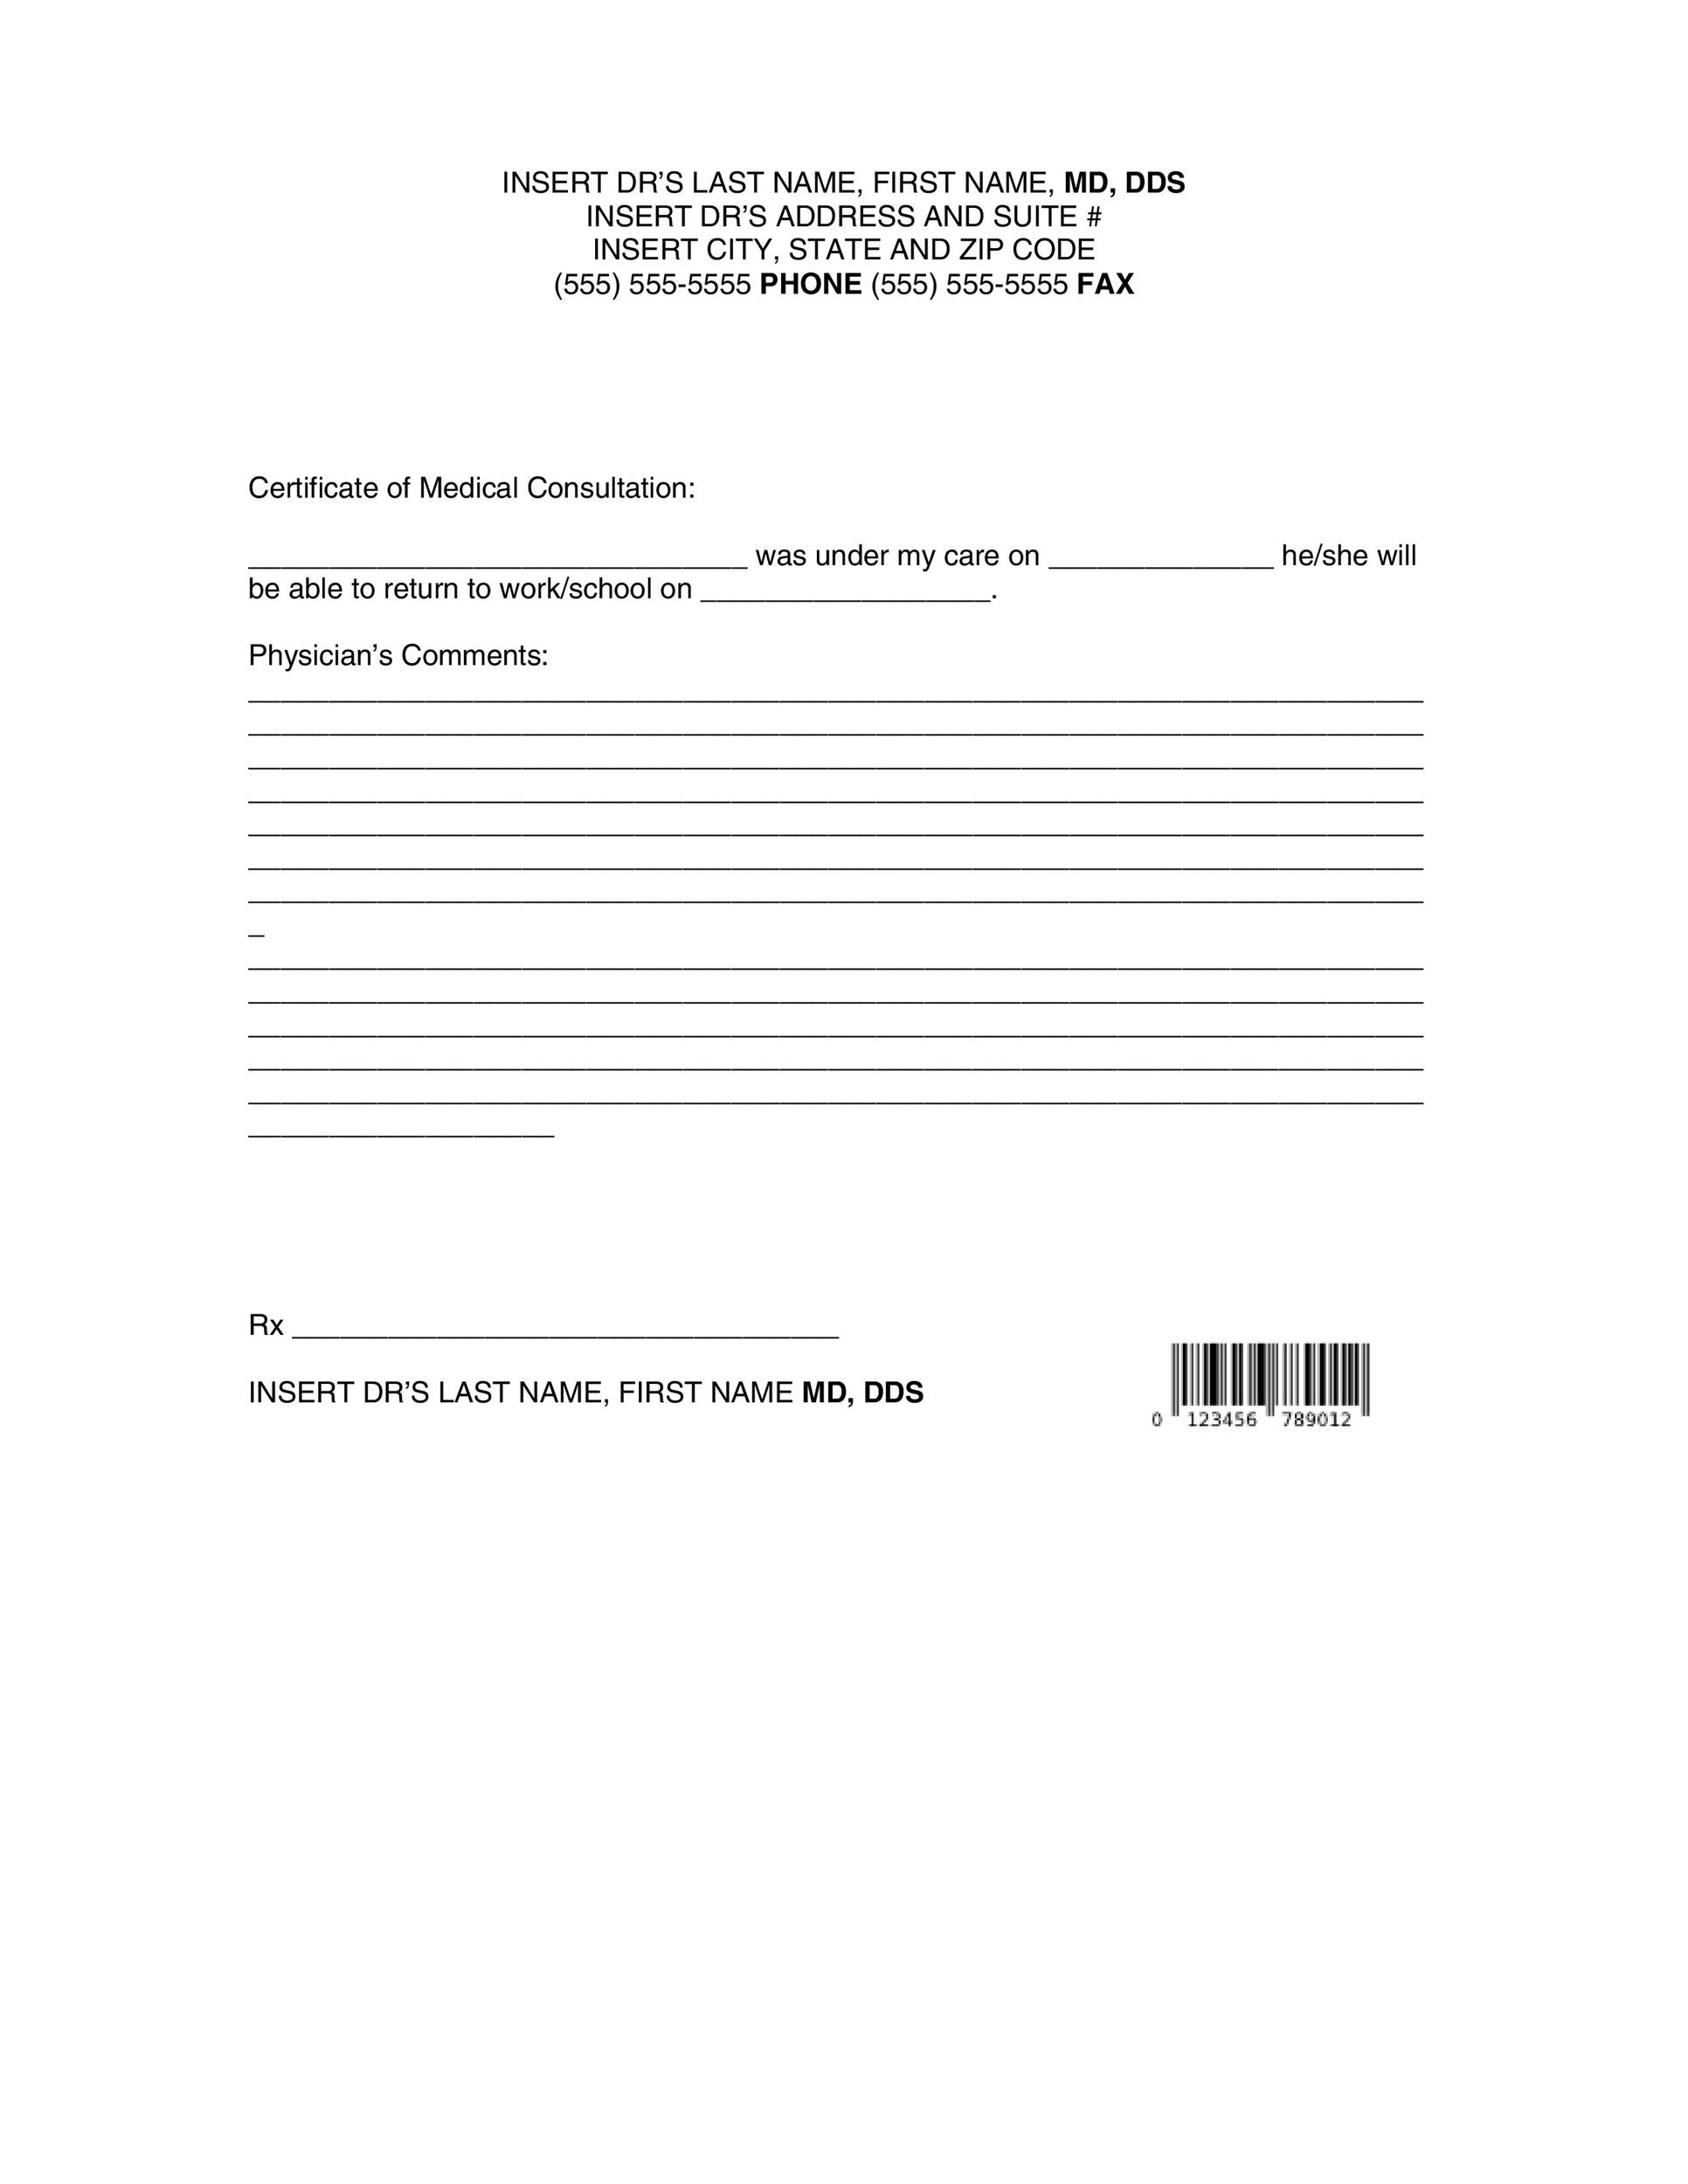 Free Fake Doctors Note Template Download